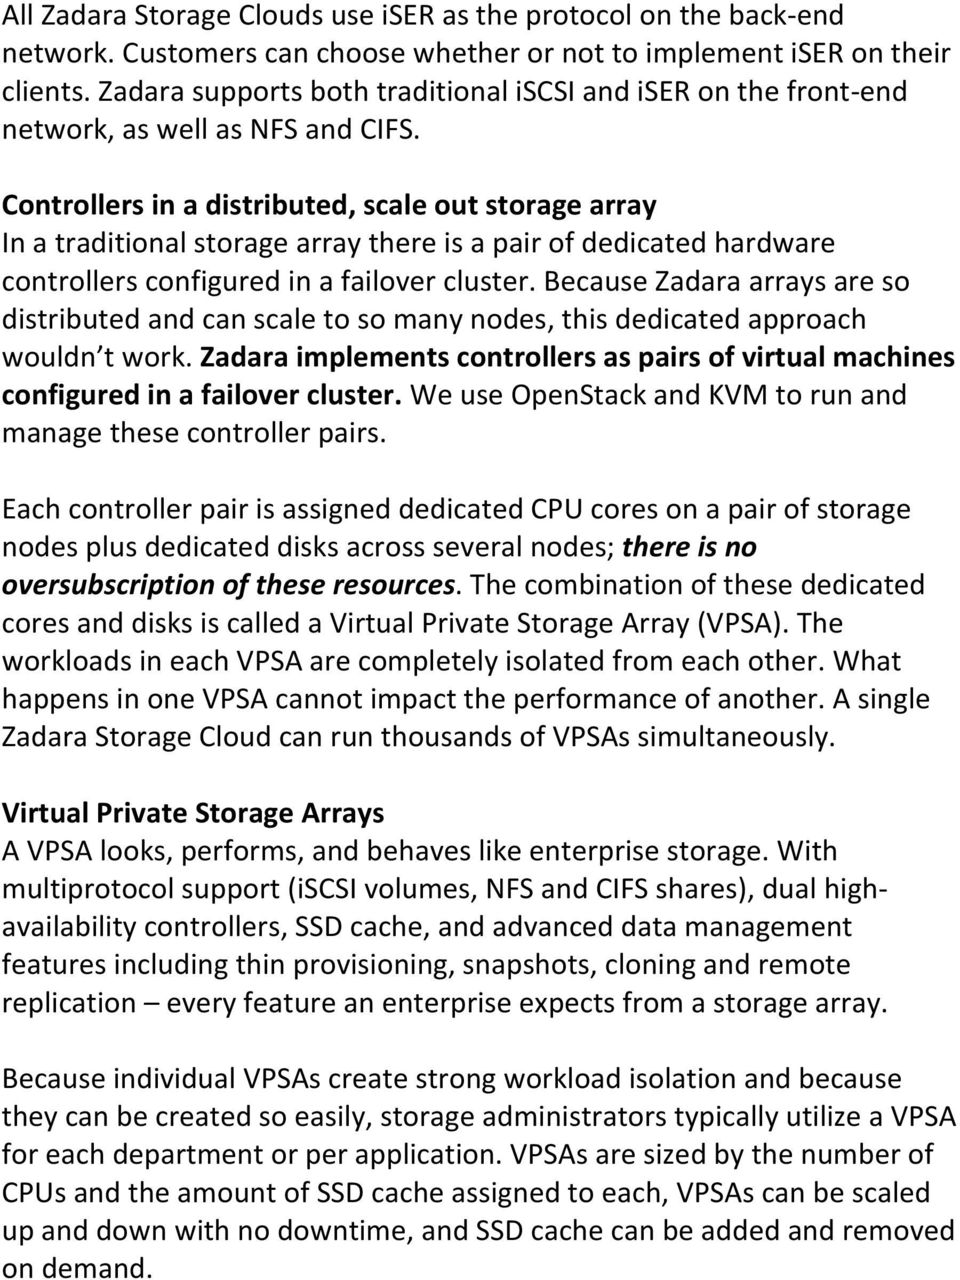 Controllers in a distributed, scale out storage array In a traditional storage array there is a pair of dedicated hardware controllers configured in a failover cluster.